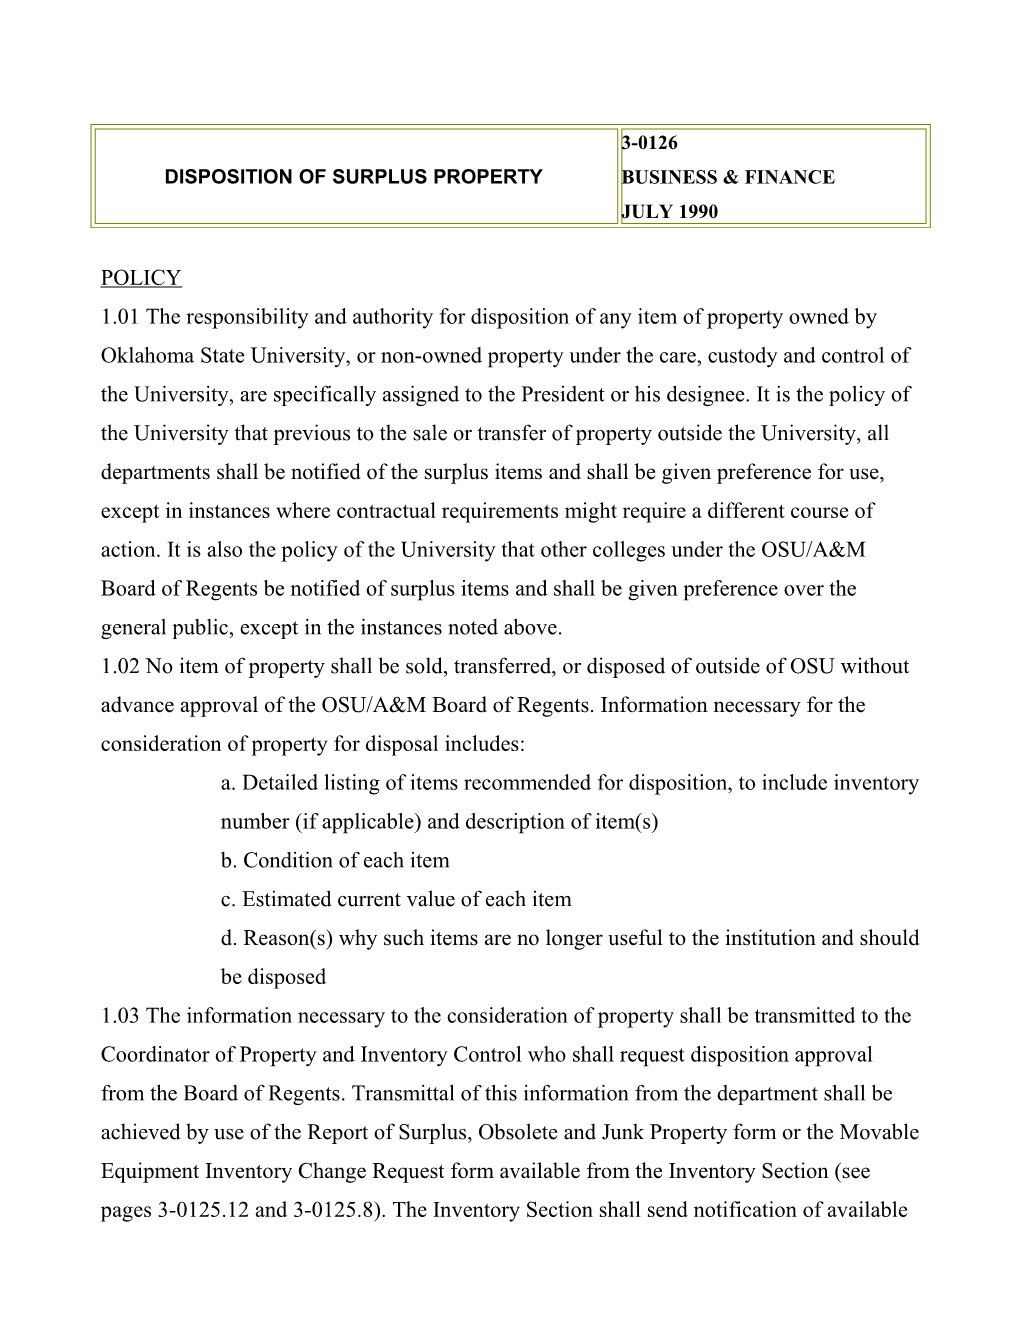 Disposition of Surplus Property